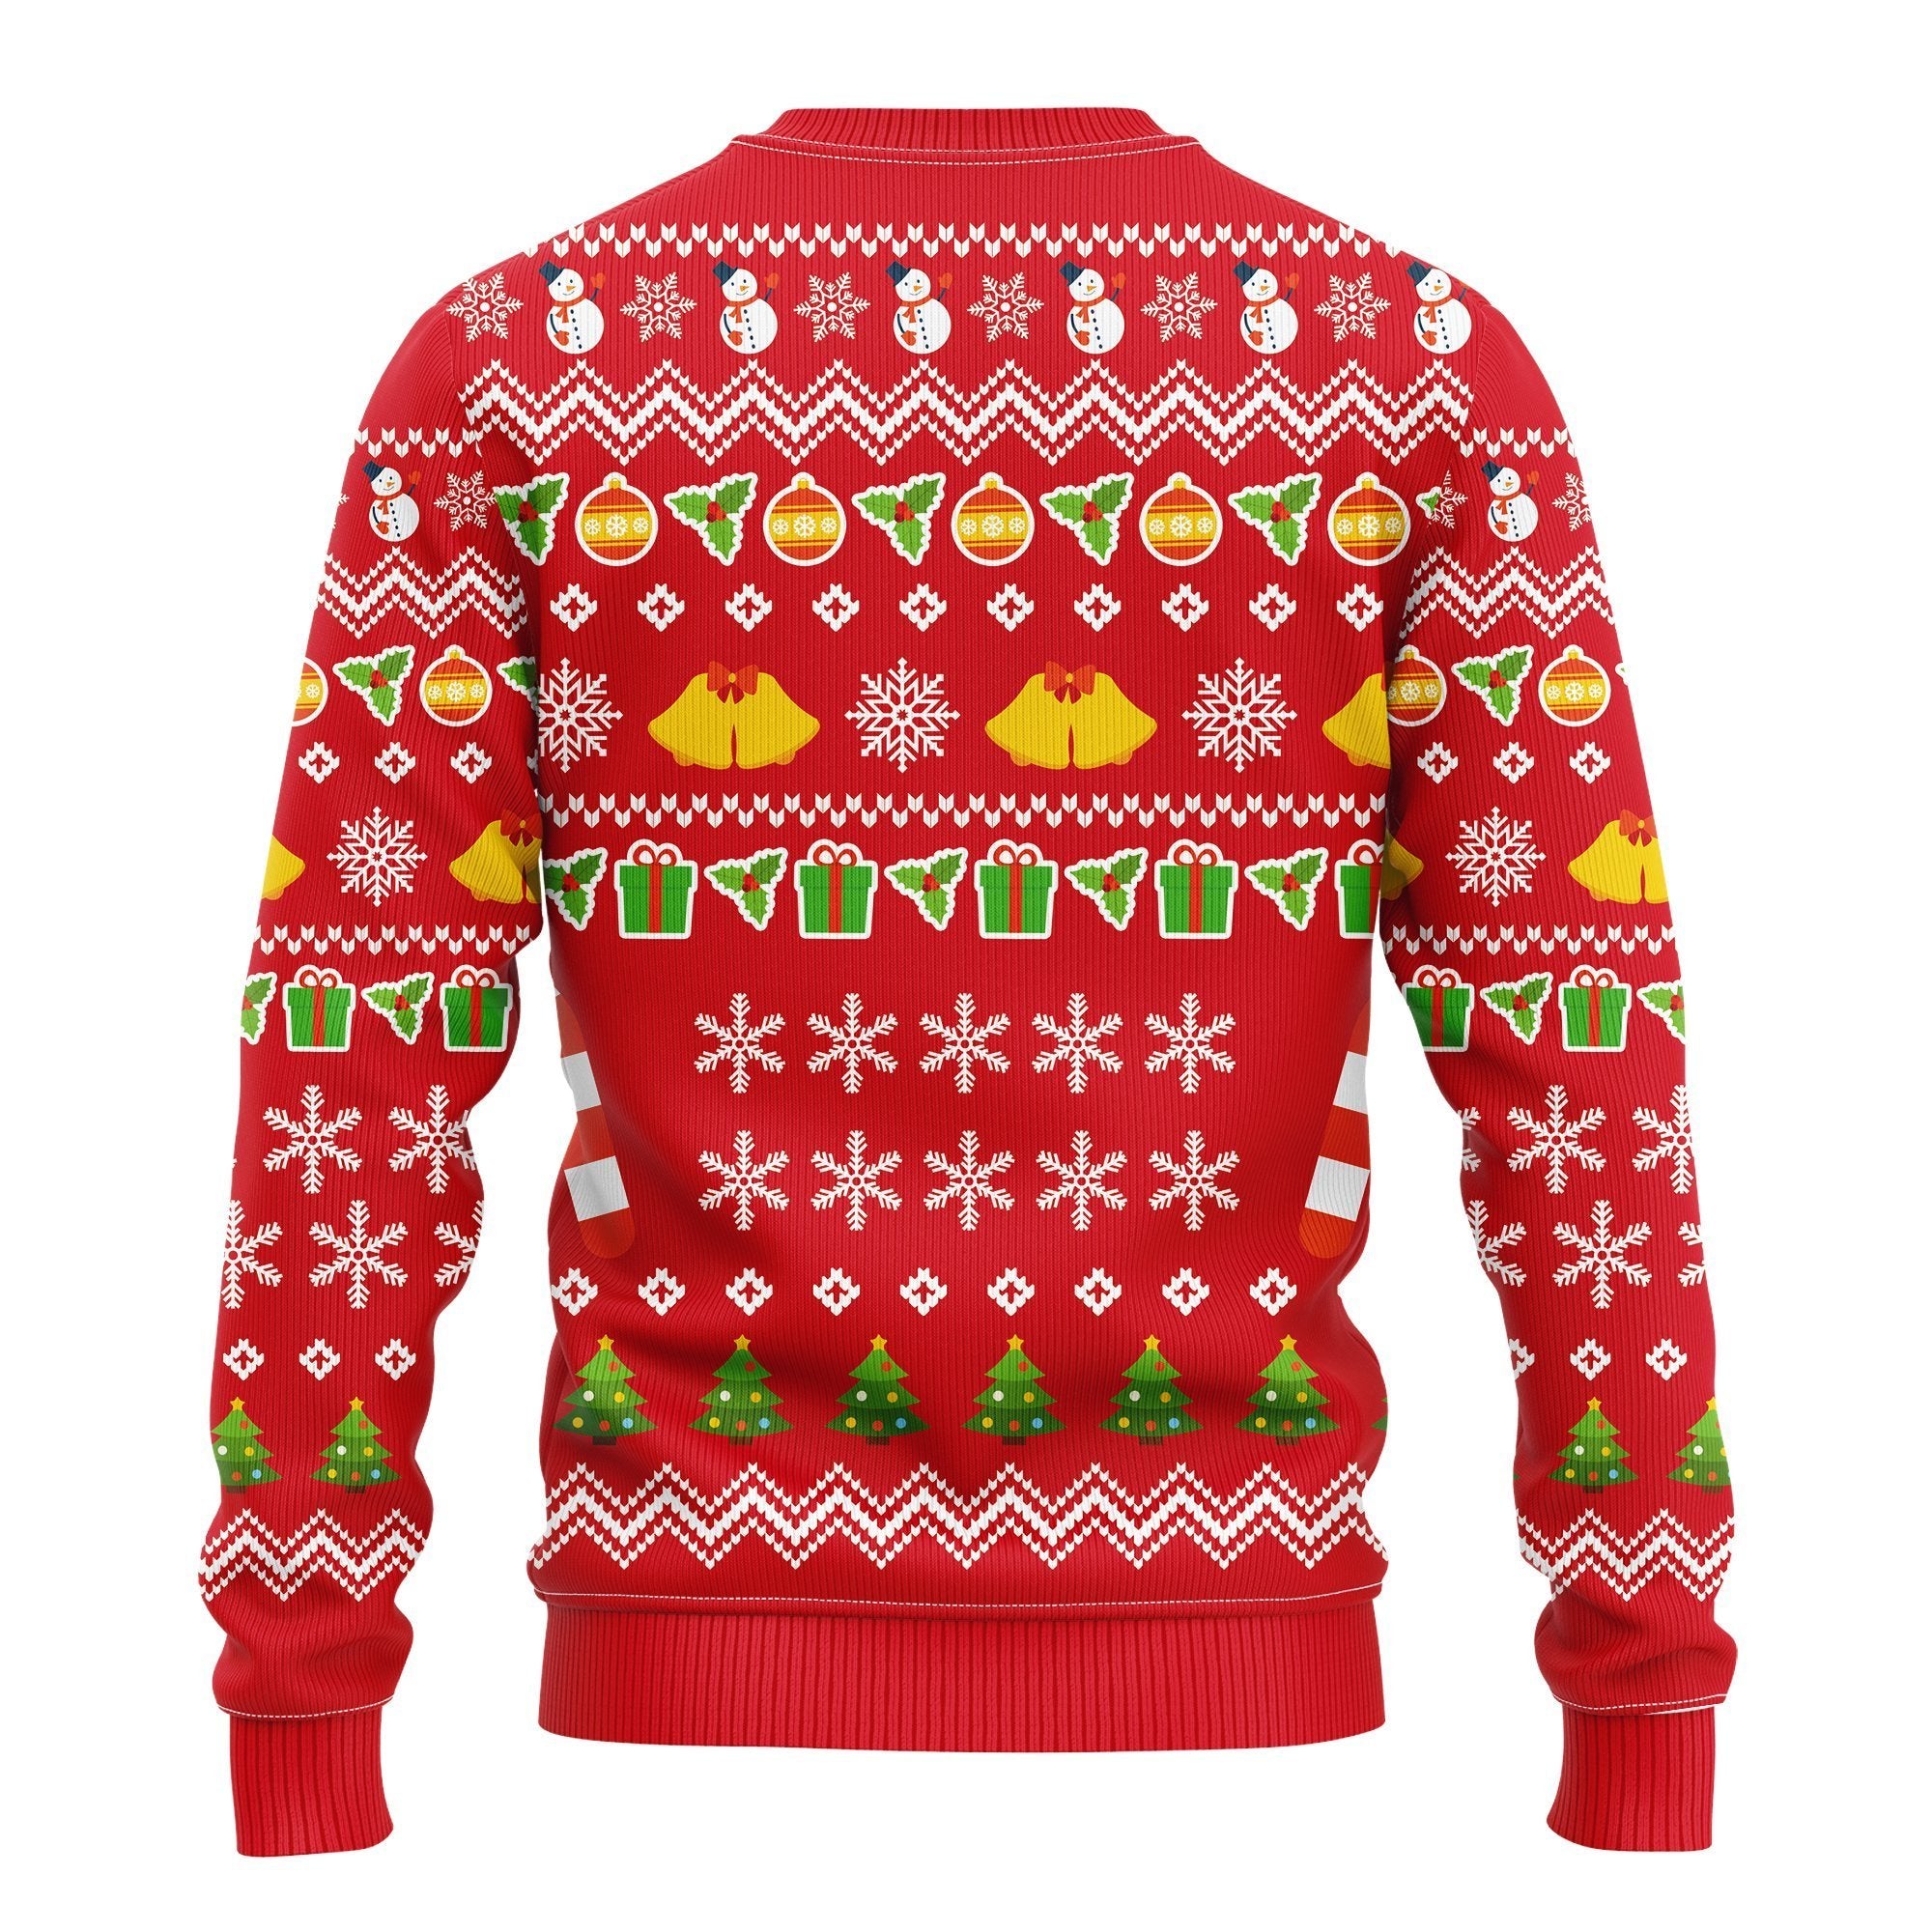 This Is My Ugly Christmas Sweater Amazing Gift Idea Thanksgiving Gift